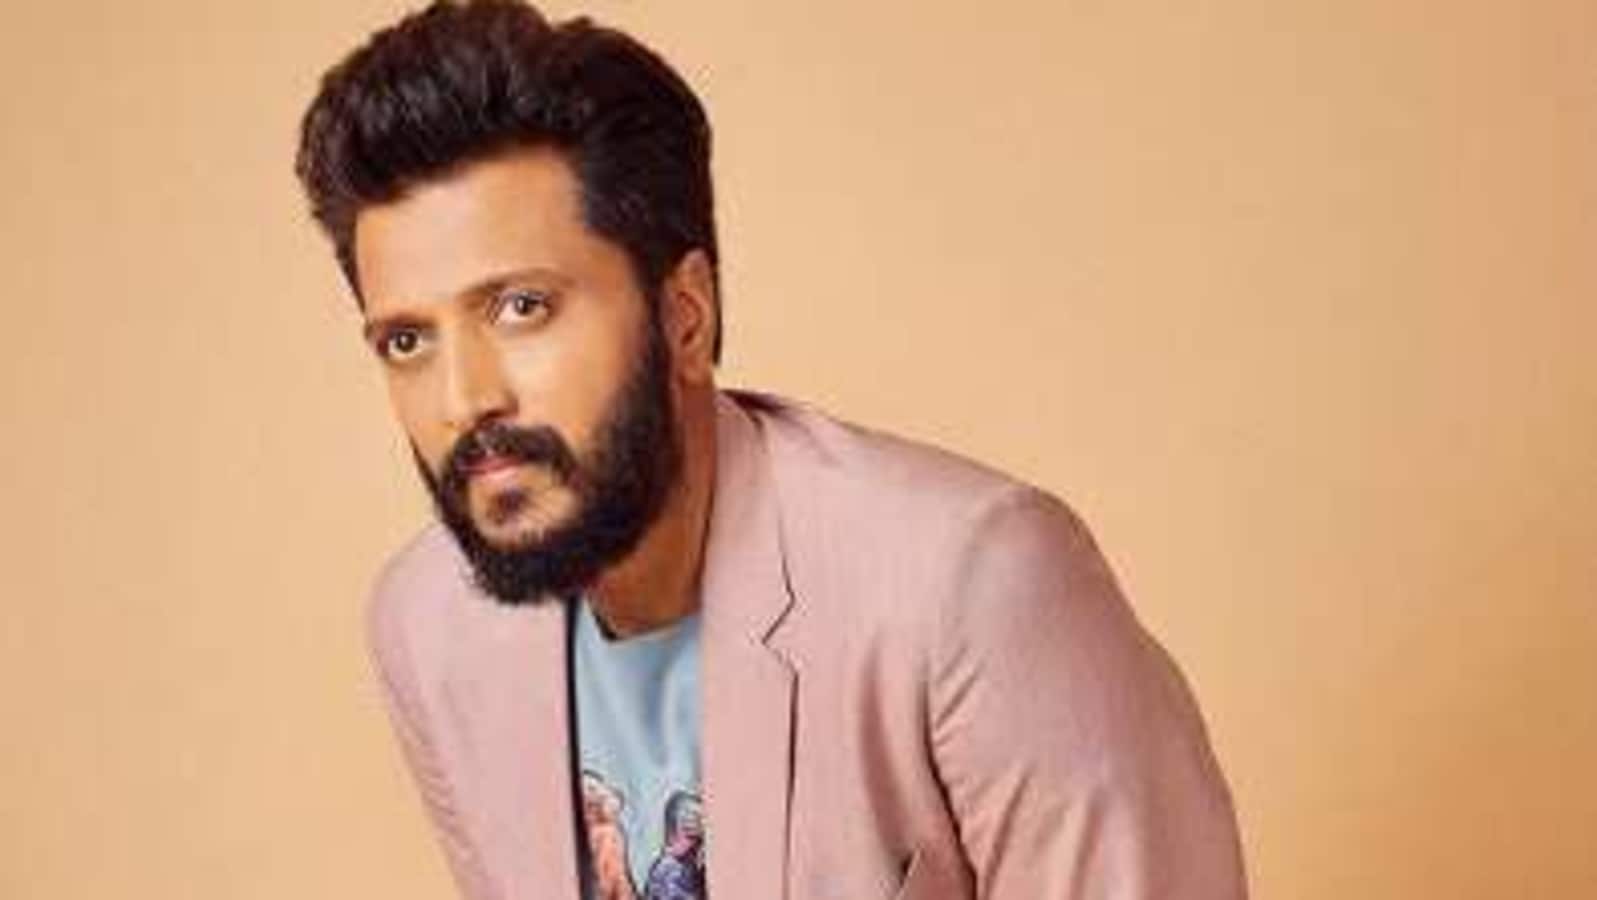 Riteish Deshmukh debuts new look, drops hint about new film. See pic here |  Bollywood - Hindustan Times